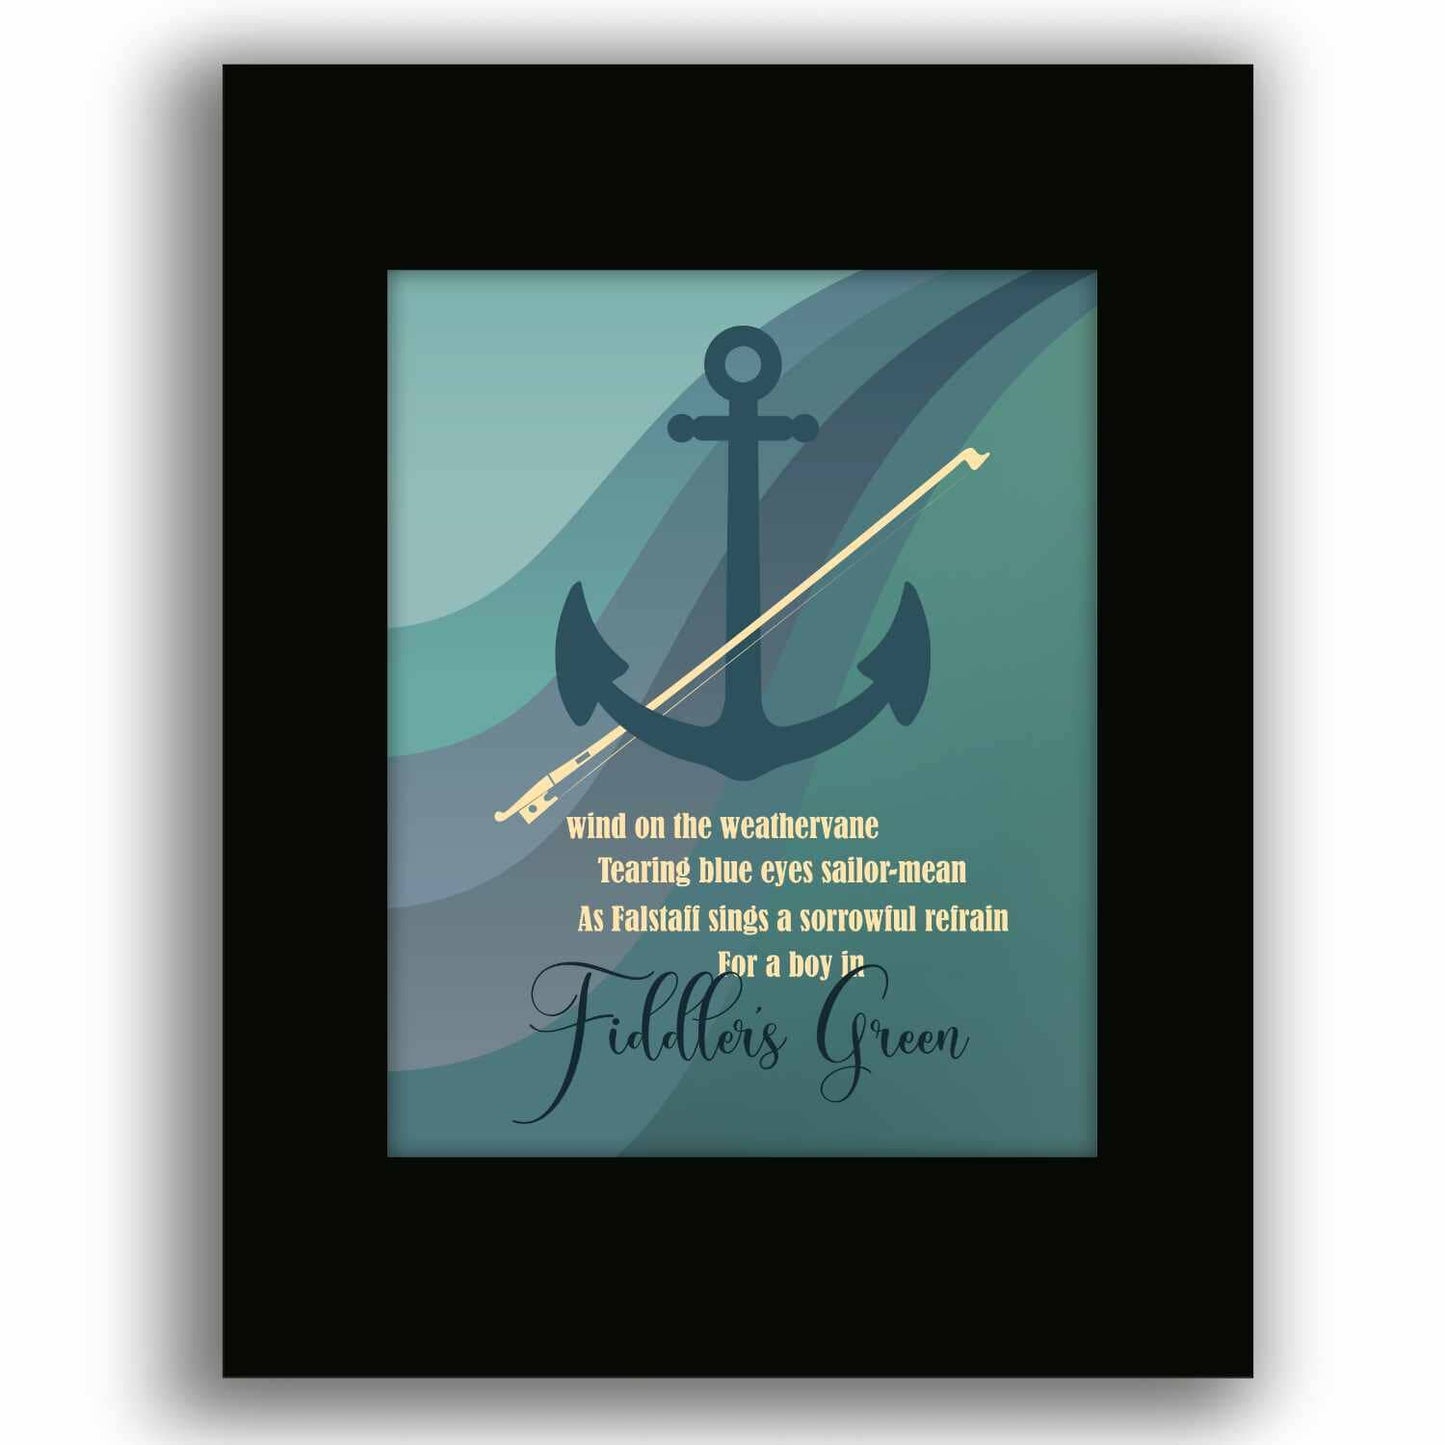 Fiddlers Green by Tragically Hip - Song Lyric Music Wall Art Song Lyrics Art Song Lyrics Art 8x10 Black Matted Print 